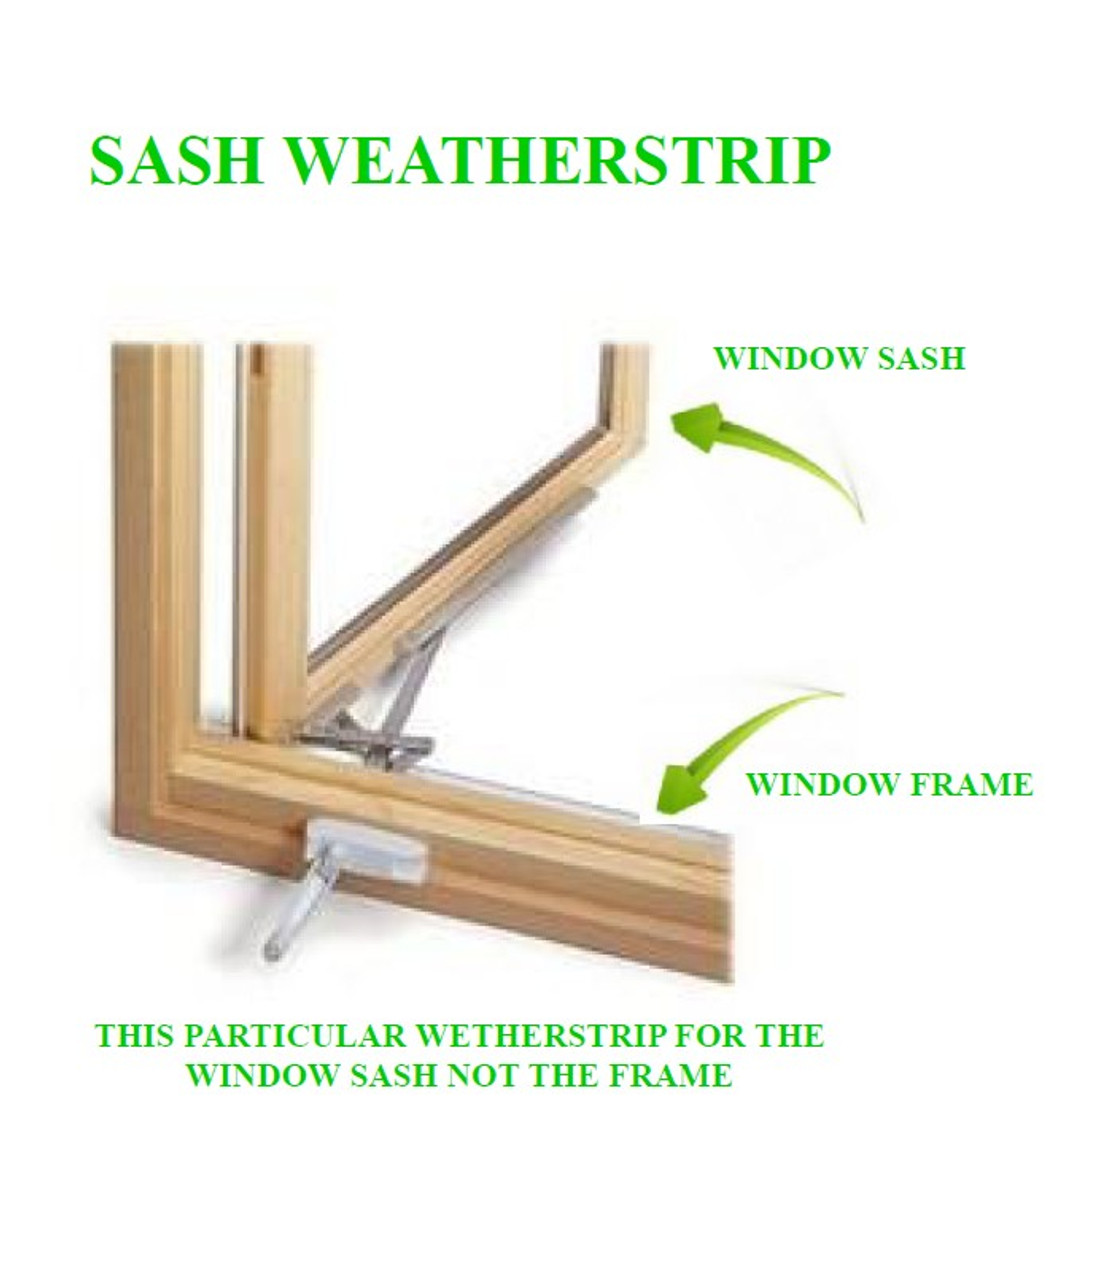 Semco Casement Sash Weather Strip  Kit: Fits Semco casements manufactured 1979 to 2005-2166810  ( comes with qty (4) 72'' pieces of weather strip.